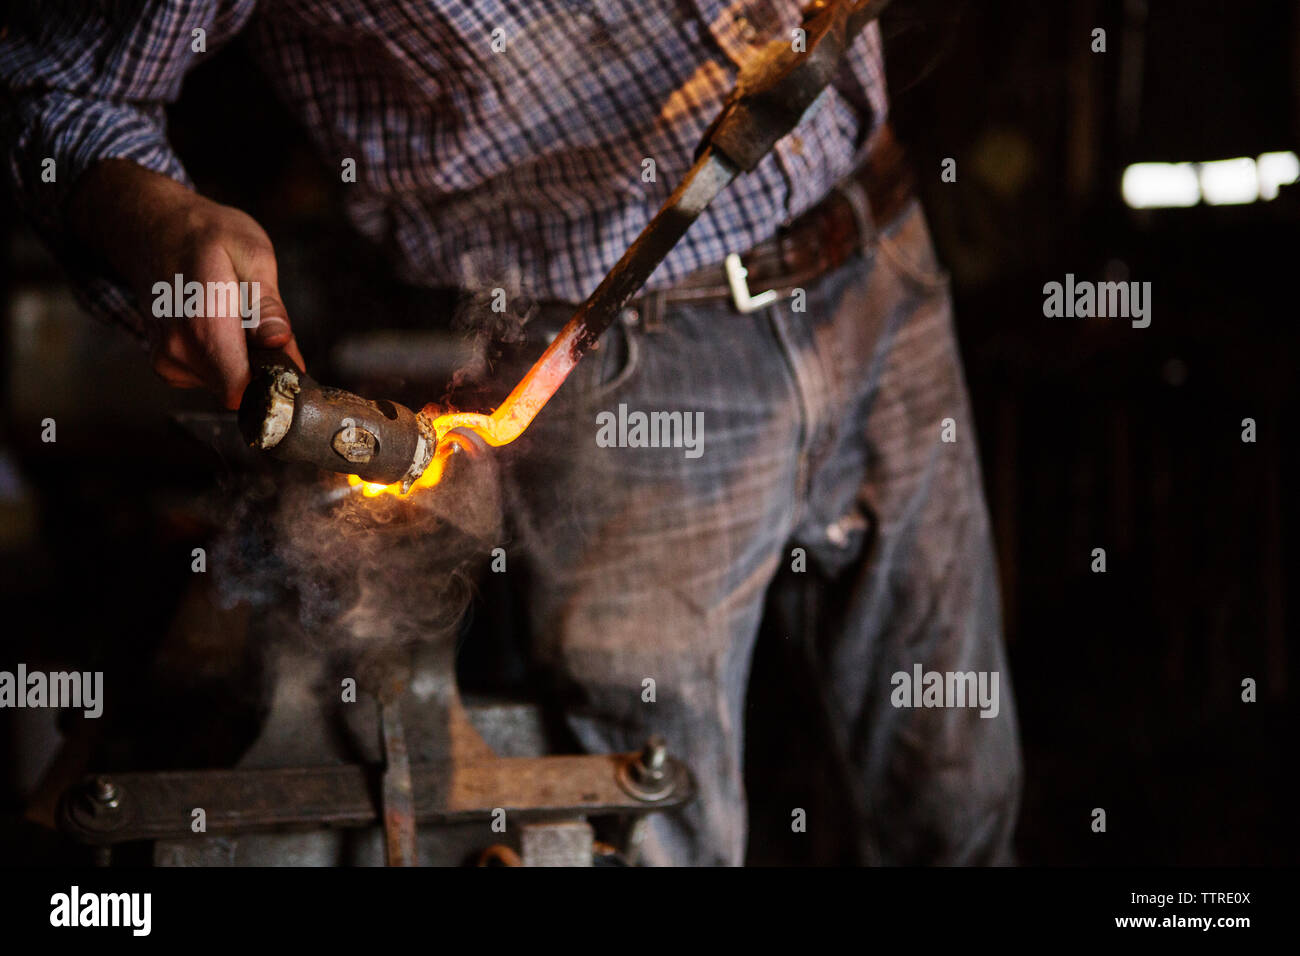 Midsection of craftsperson hammering metal at factory Stock Photo